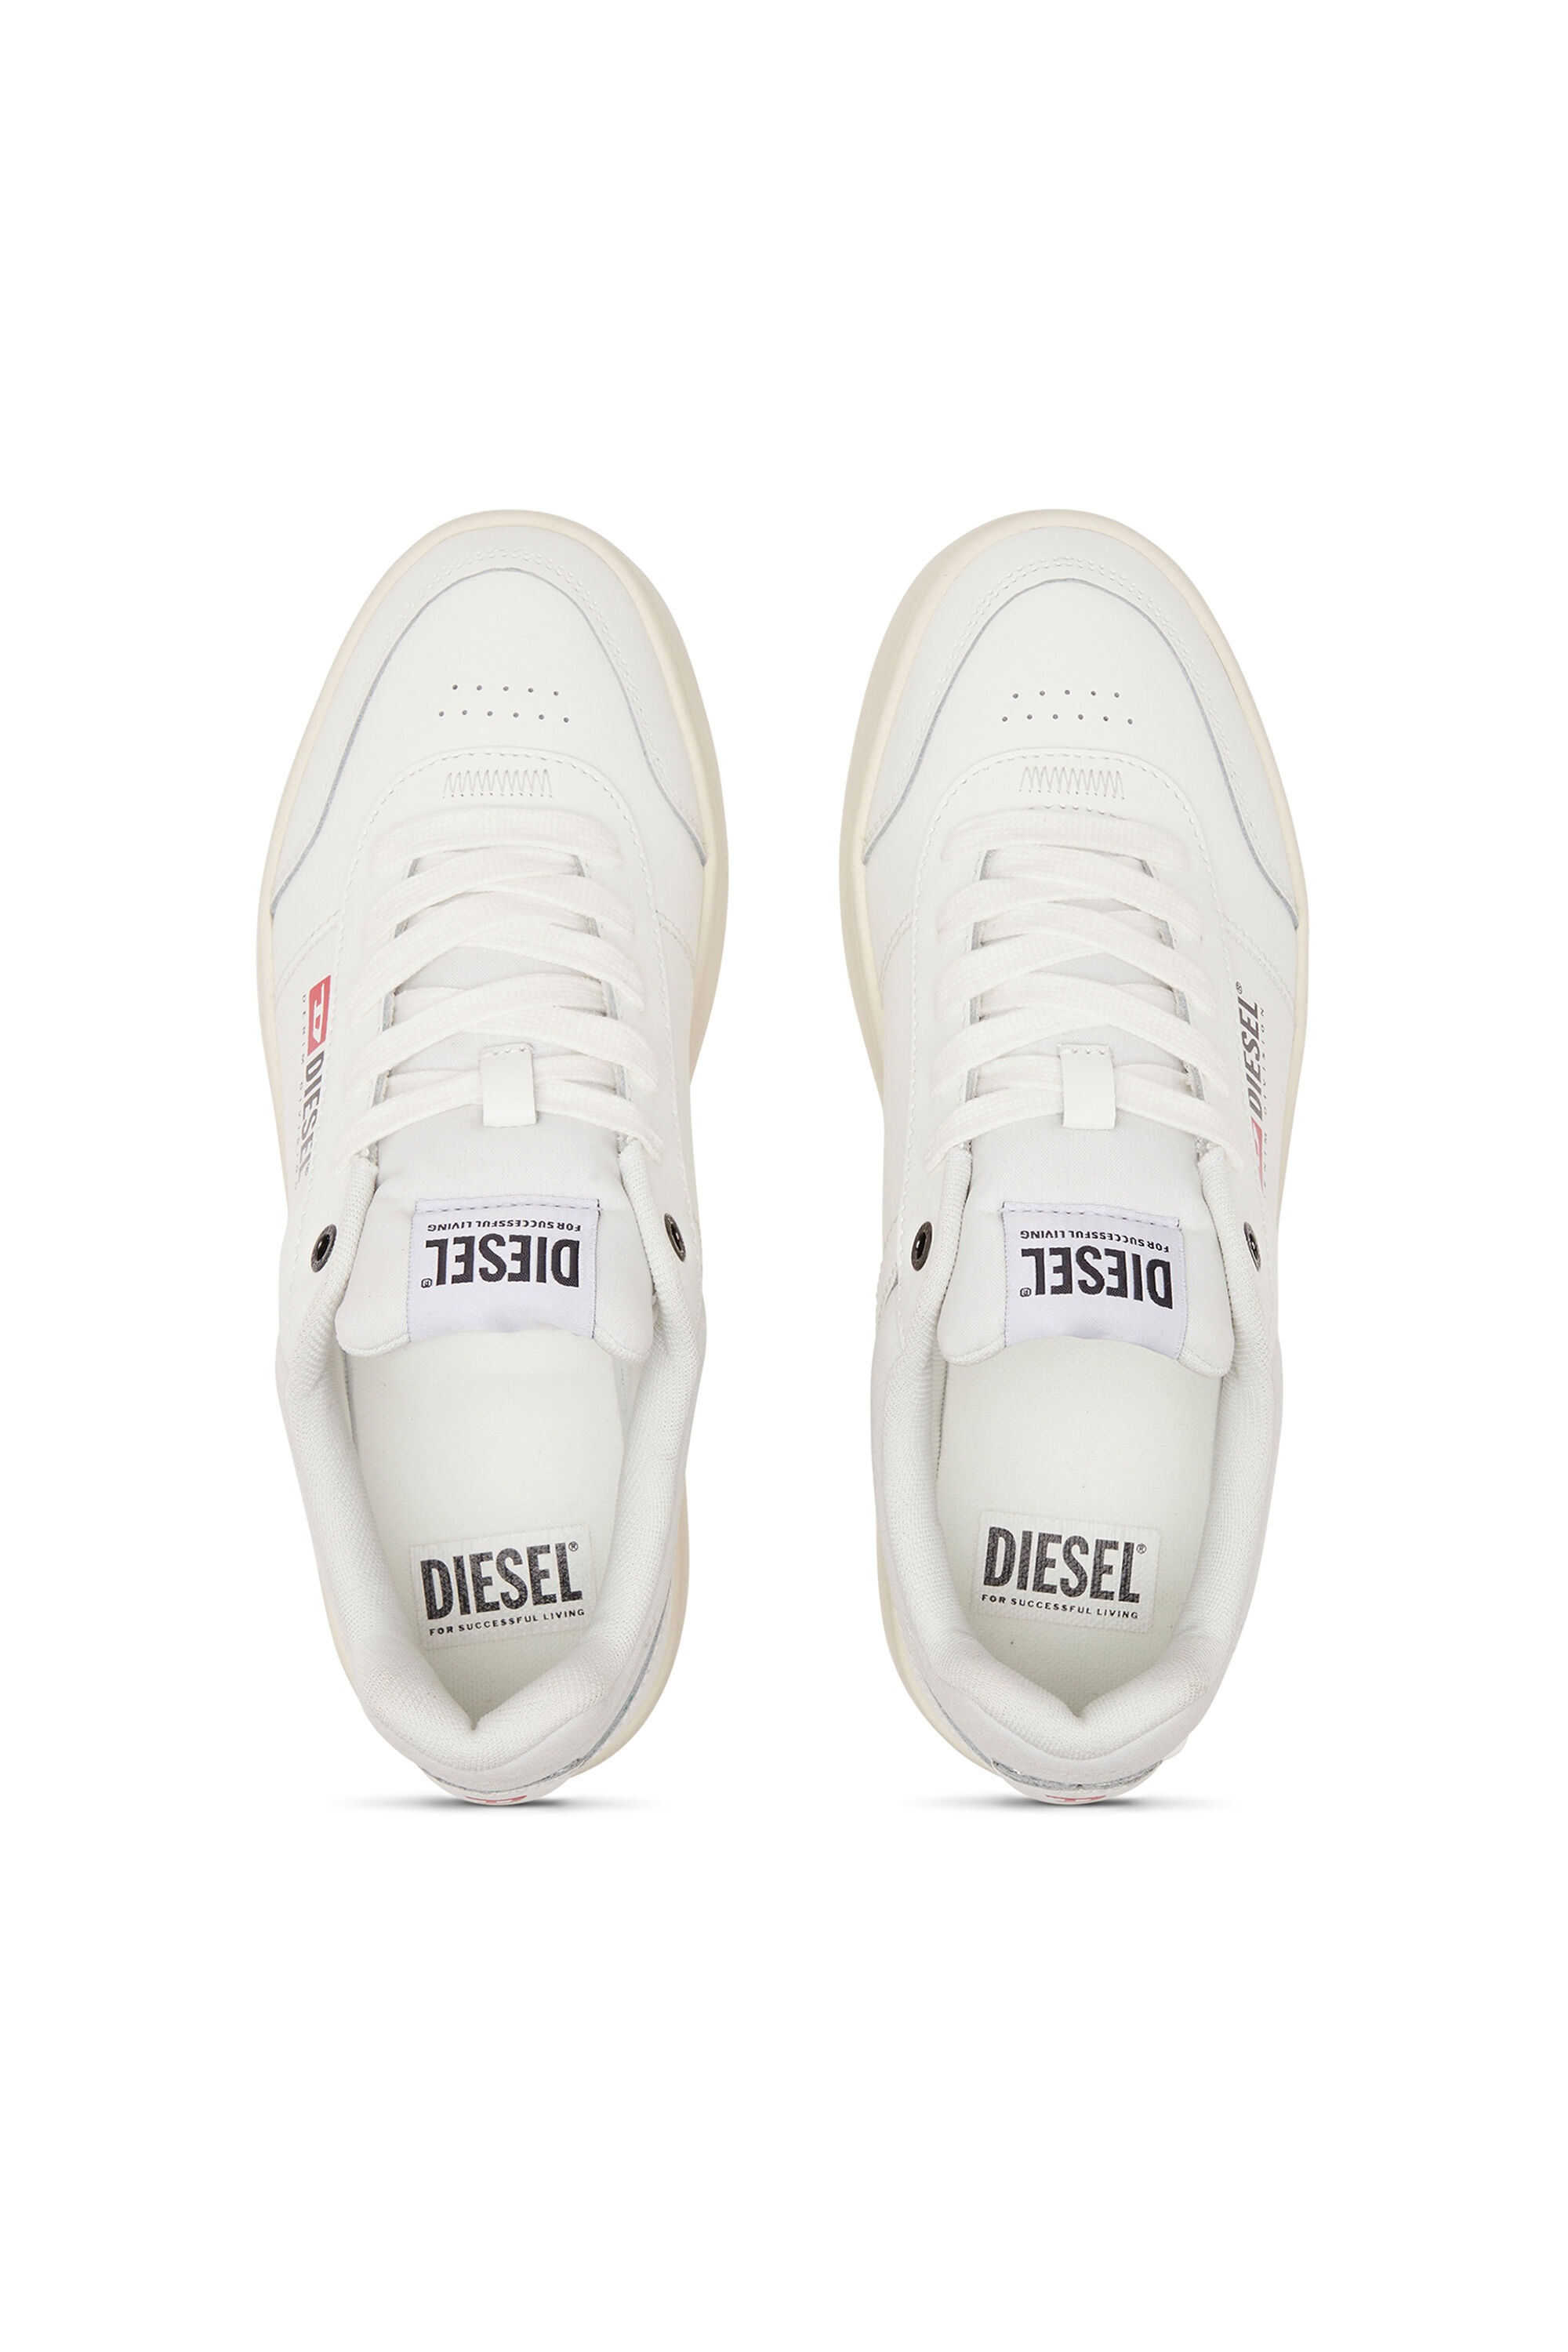 Diesel - S-ATHENE BOLD VTG W, Female S-Athene-Retro platform sneakers in leather in ホワイト - Image 6